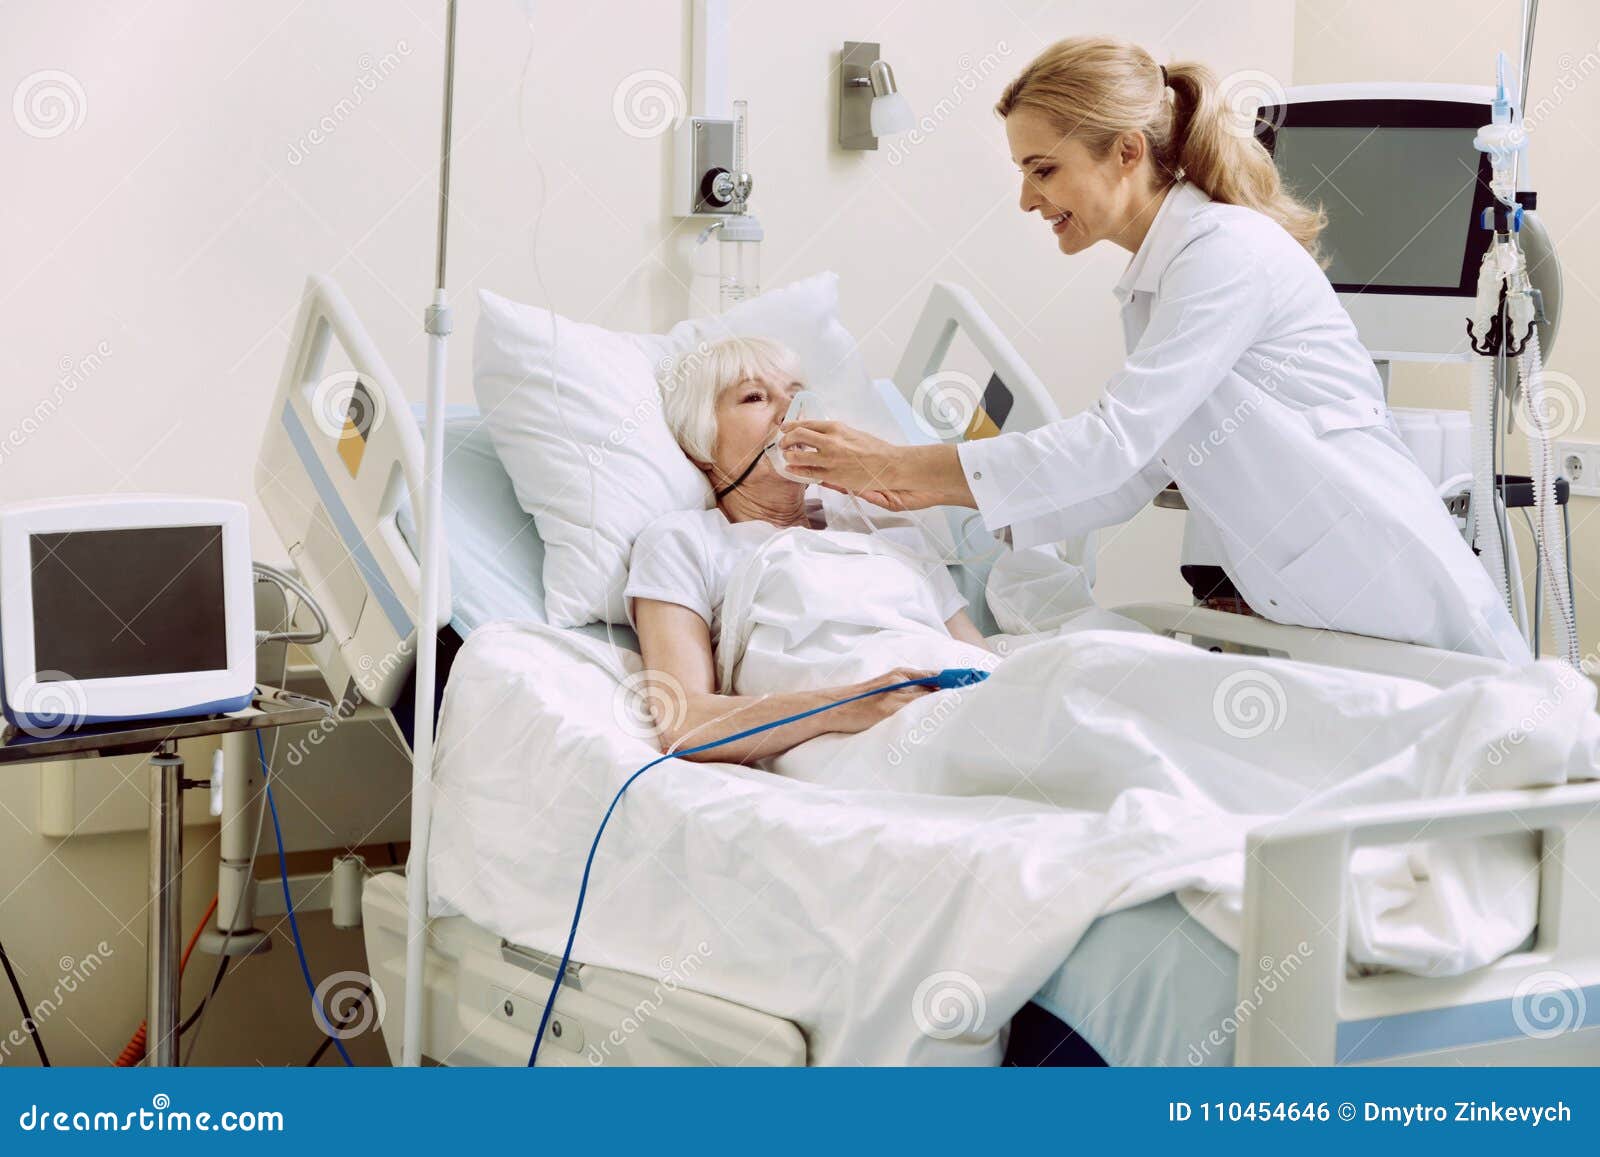 smiling physician adjusting respiratory support at hospital